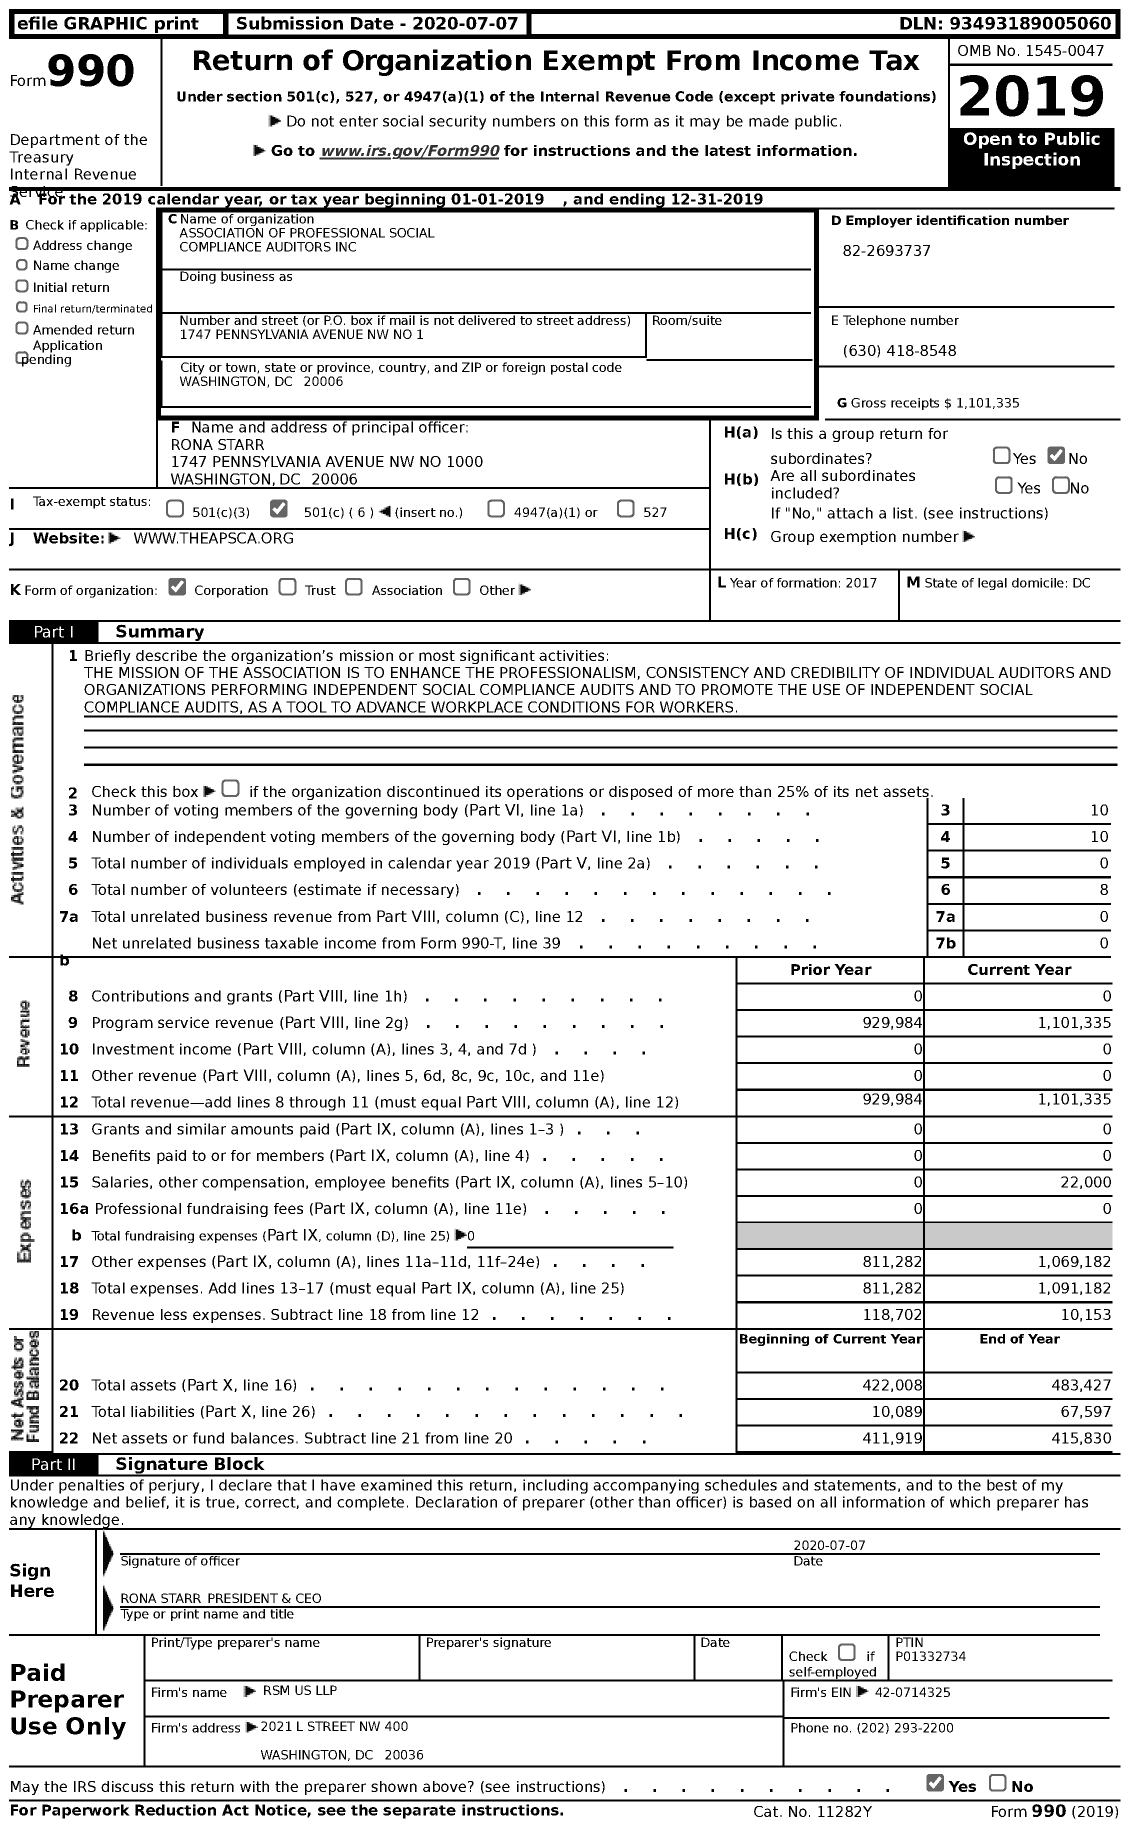 Image of first page of 2019 Form 990 for Association of Professional Social Compliance Auditors